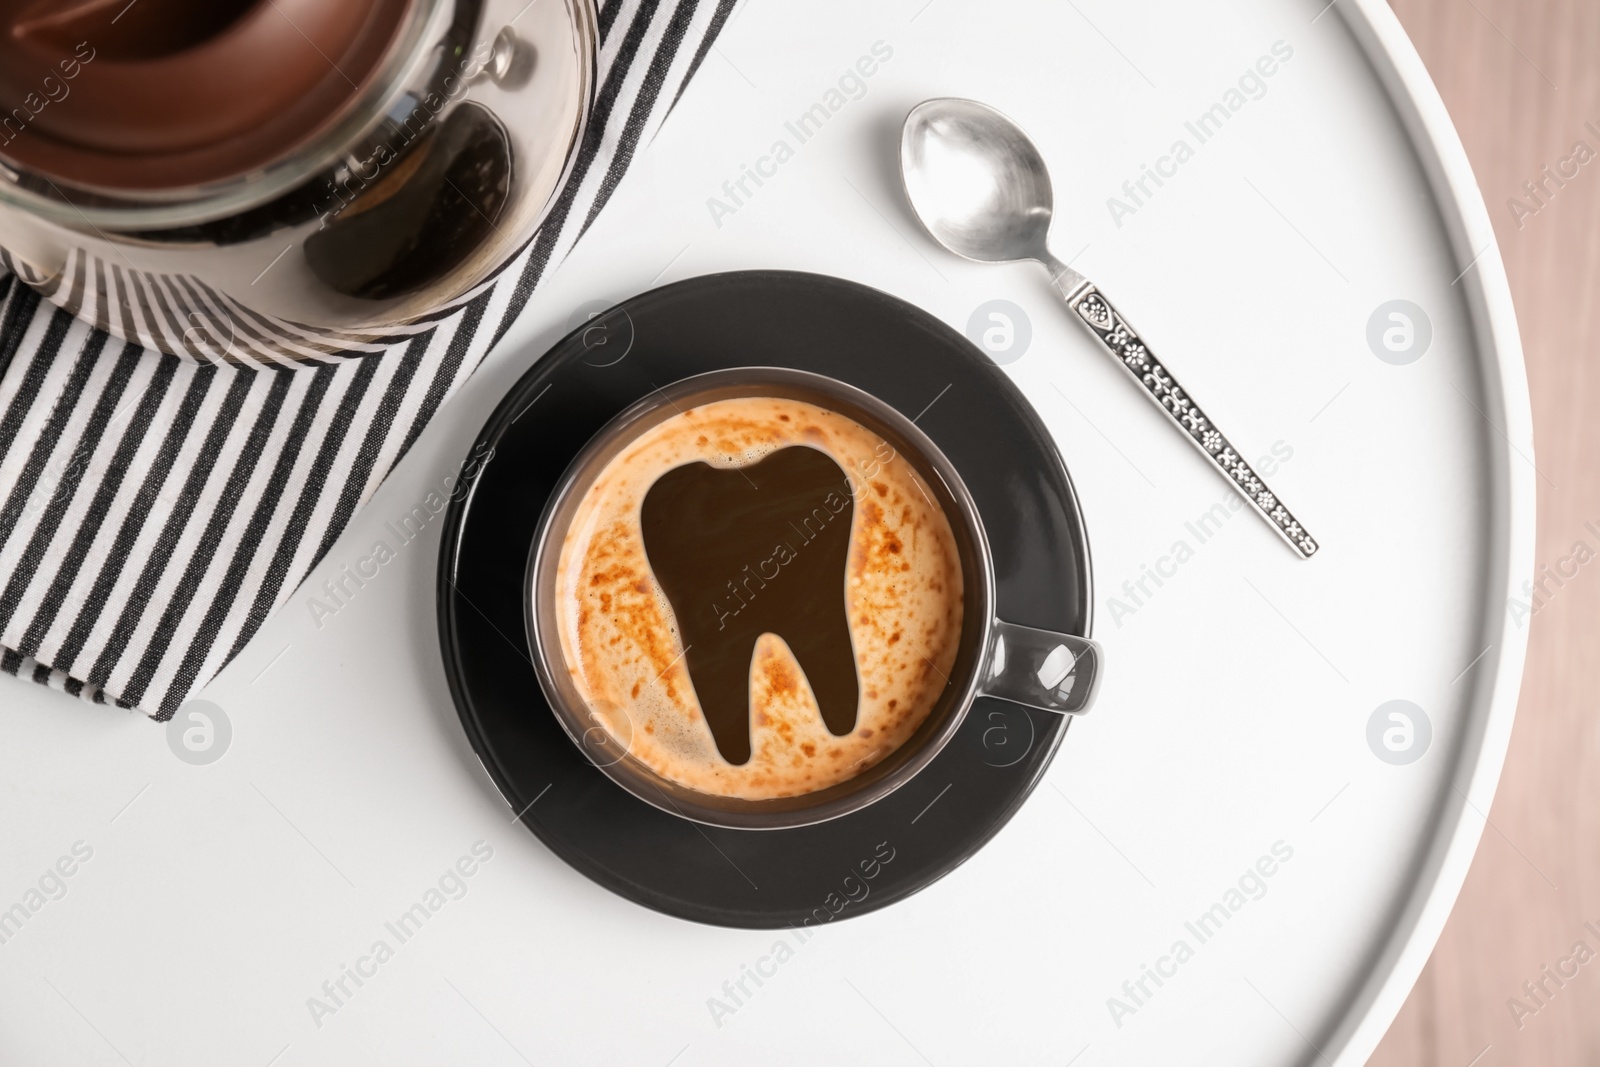 Image of Coffee causing dental problem. Cup of hot drink on table, top view